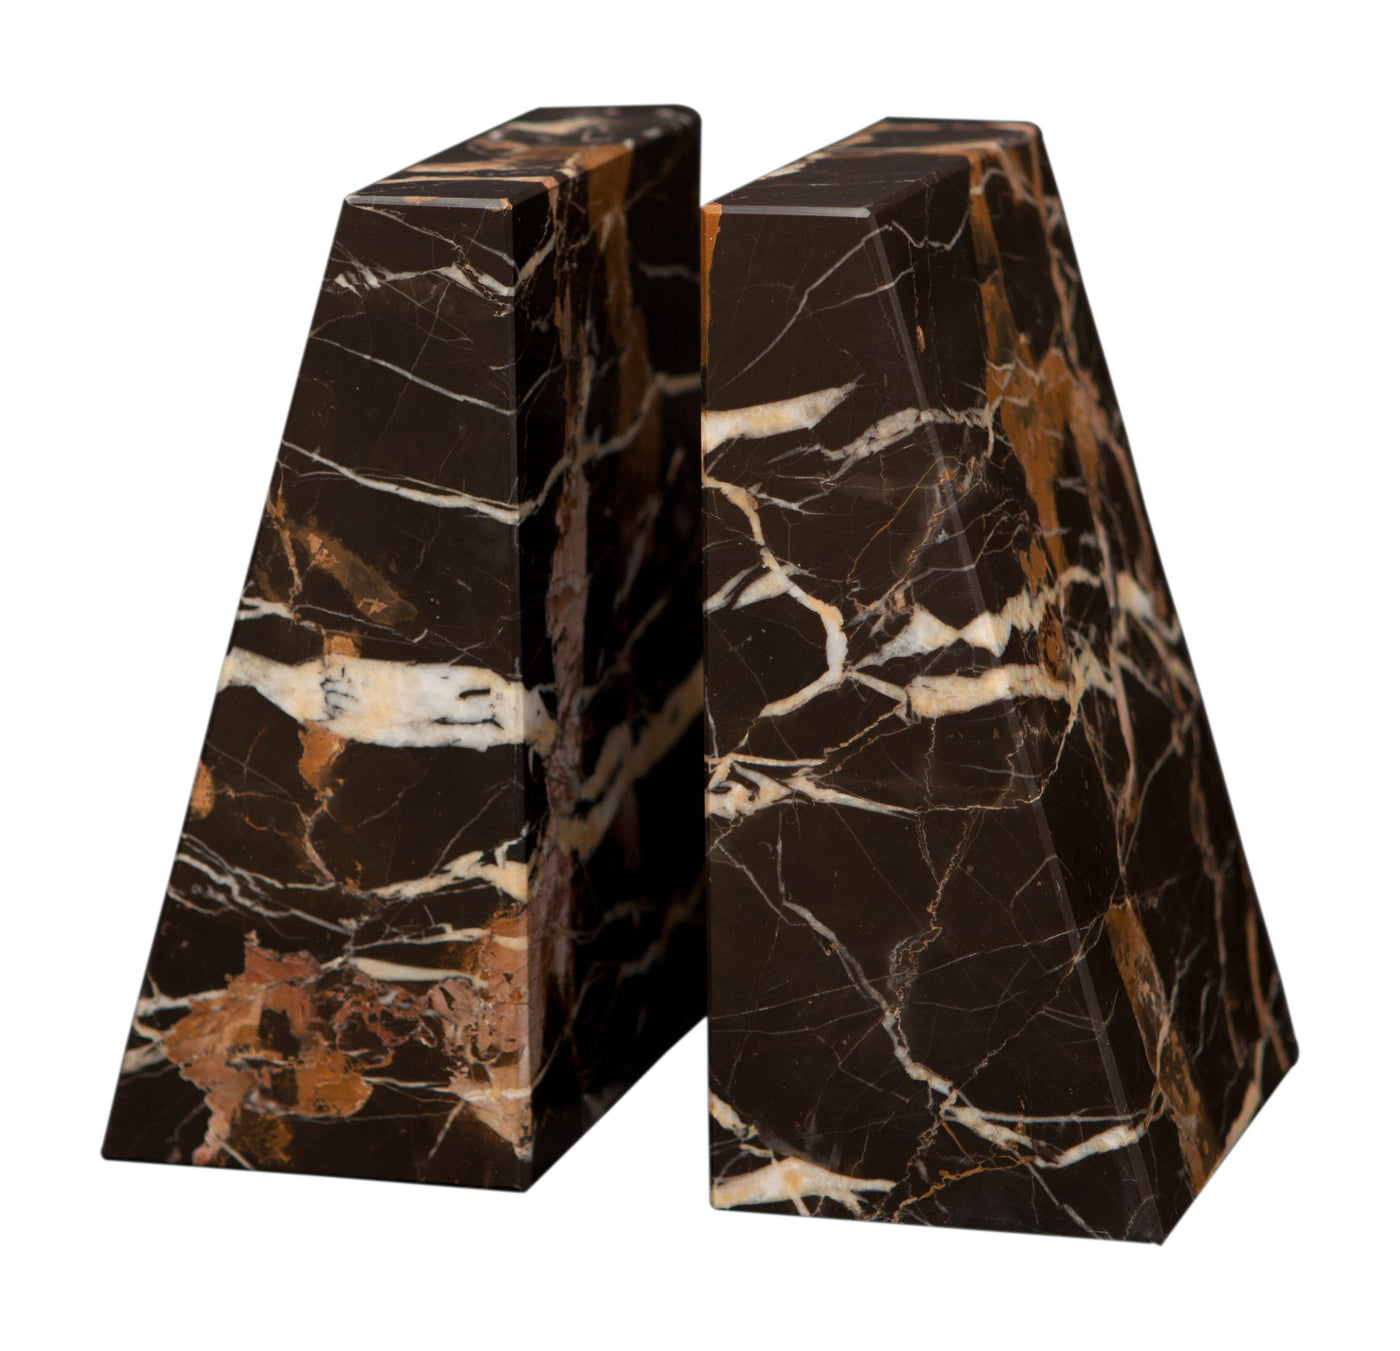 BOOKENDS BLACK & GOLD MARBLE ZEUS